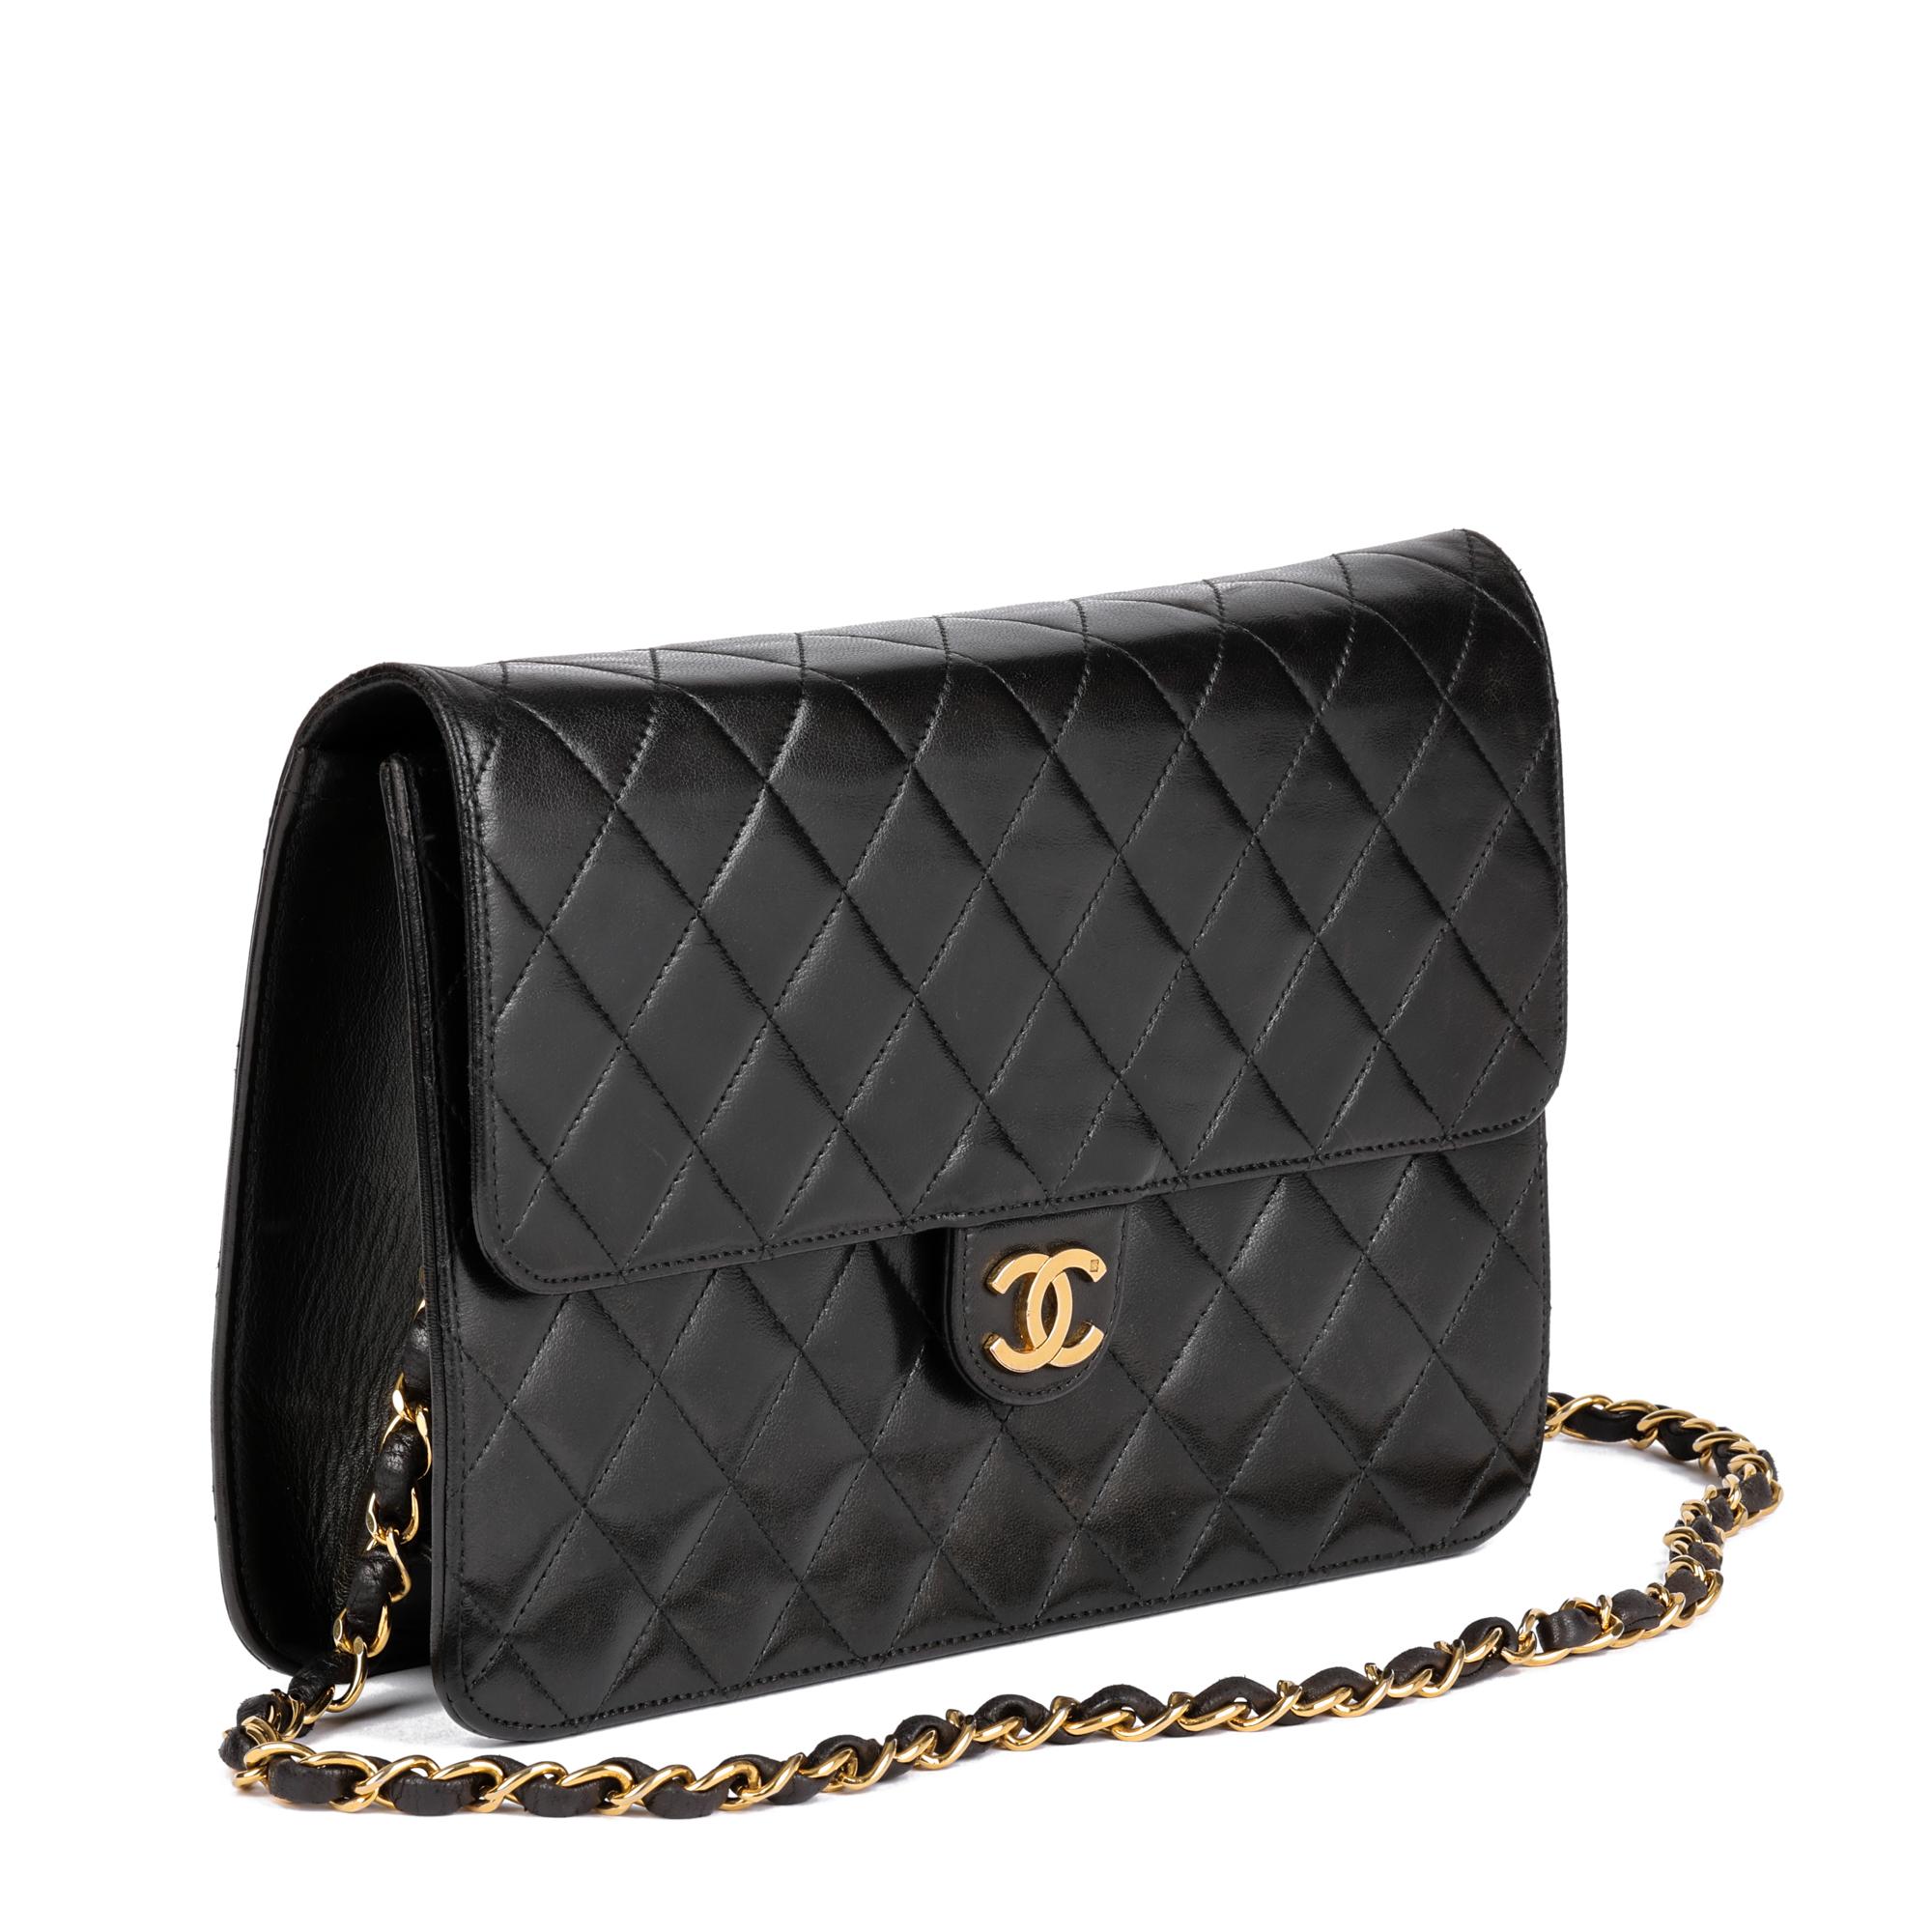 CHANEL
Black Quilted Lambskin Vintage Medium Classic Single Flap Bag

Xupes Reference: HB4679
Serial Number: 5157180
Age (Circa): 1997
Accompanied By: Authenticity Card
Authenticity Details: Authenticity Card, Serial Sticker (Made in France)
Gender: